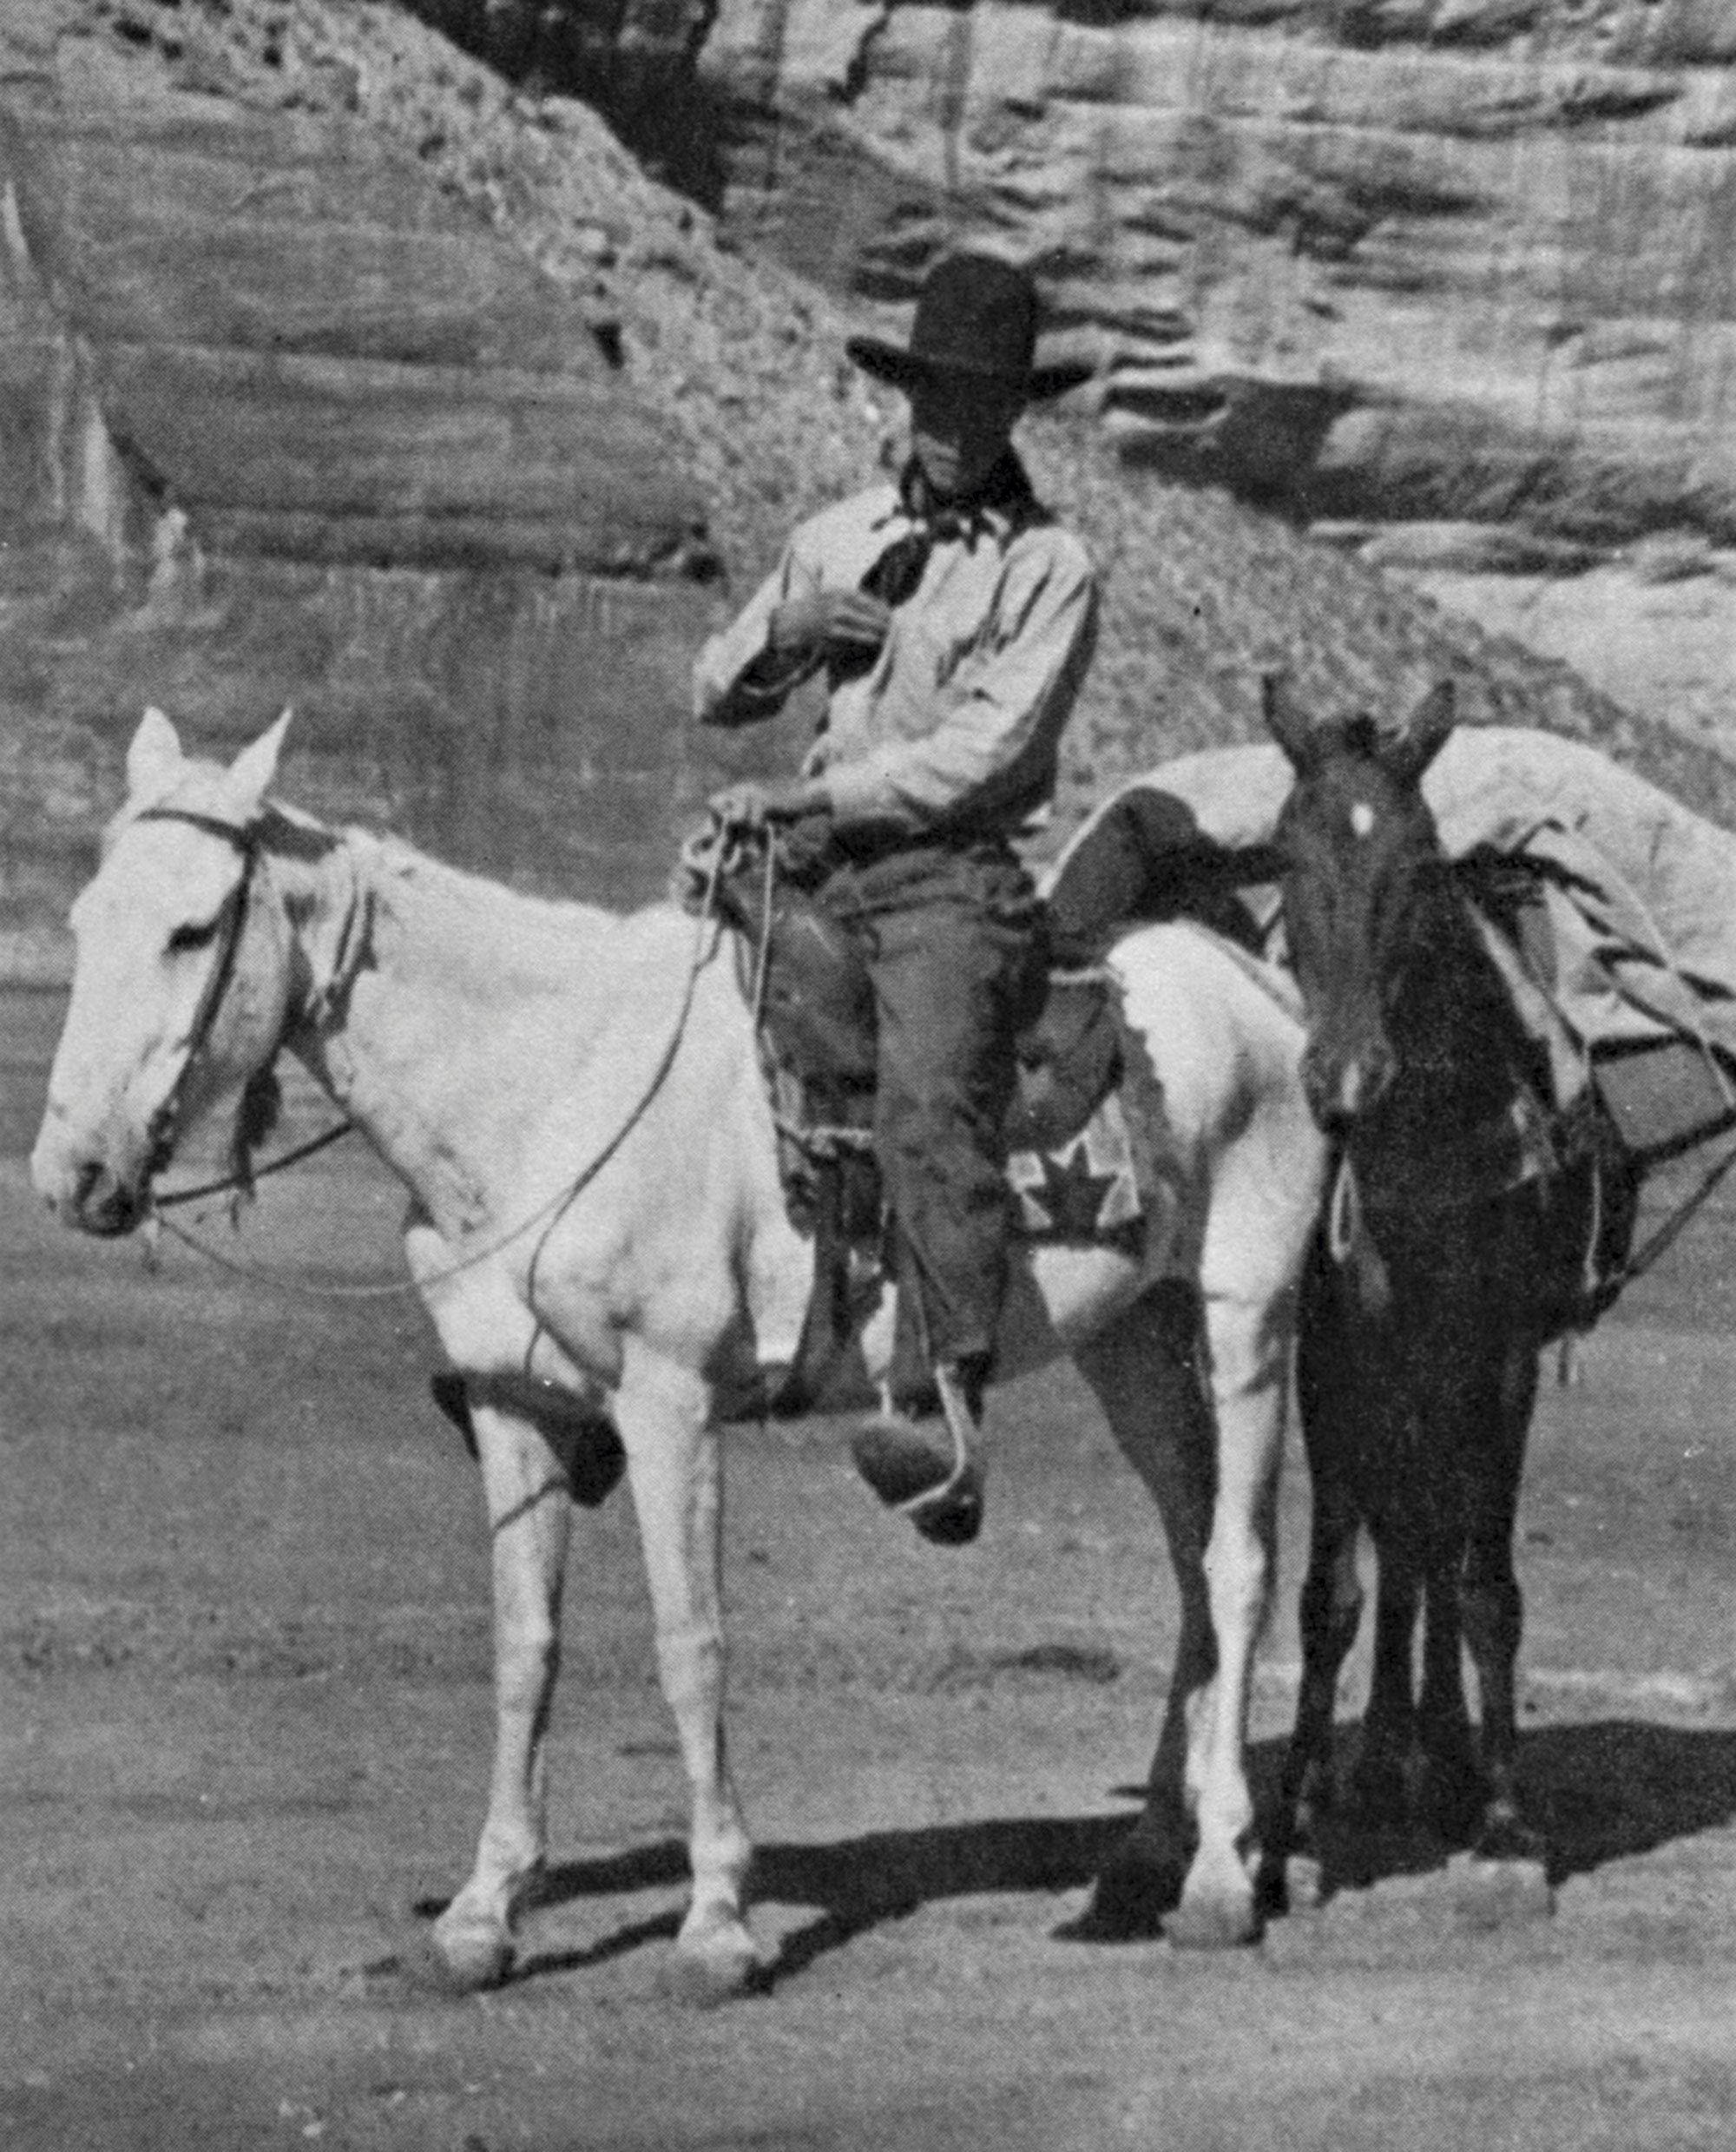 Everett and his pack animals in the desert. They were later found in a makeshift corral after he was reported missing.